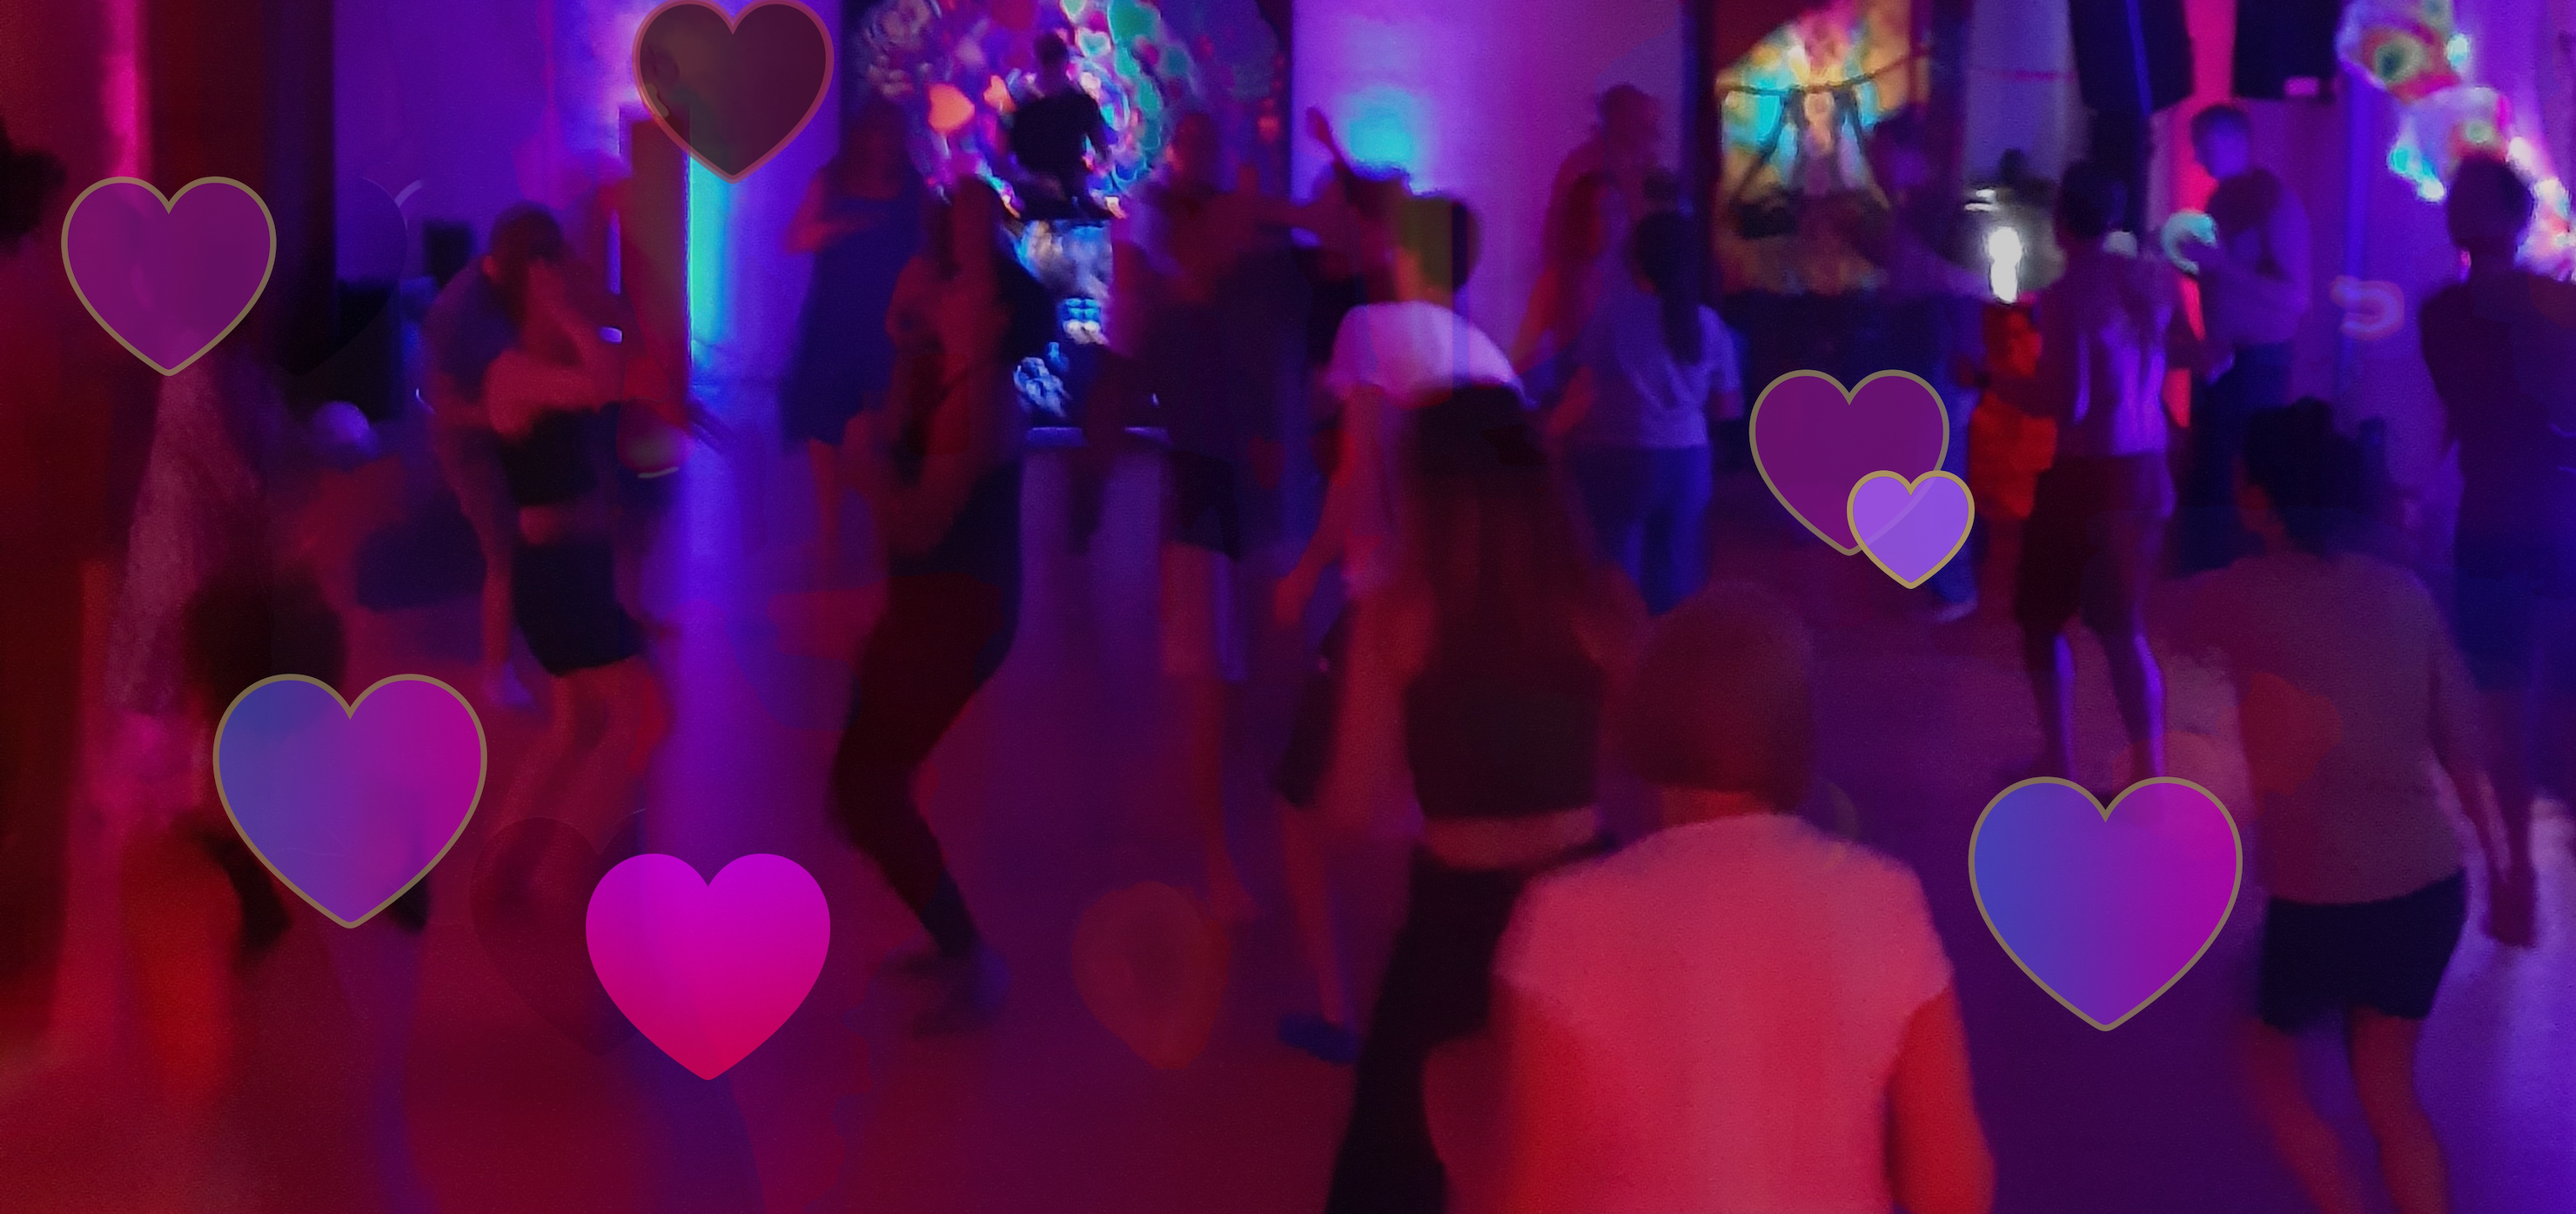 A dance floor with dancing people, overlaid with hearts.